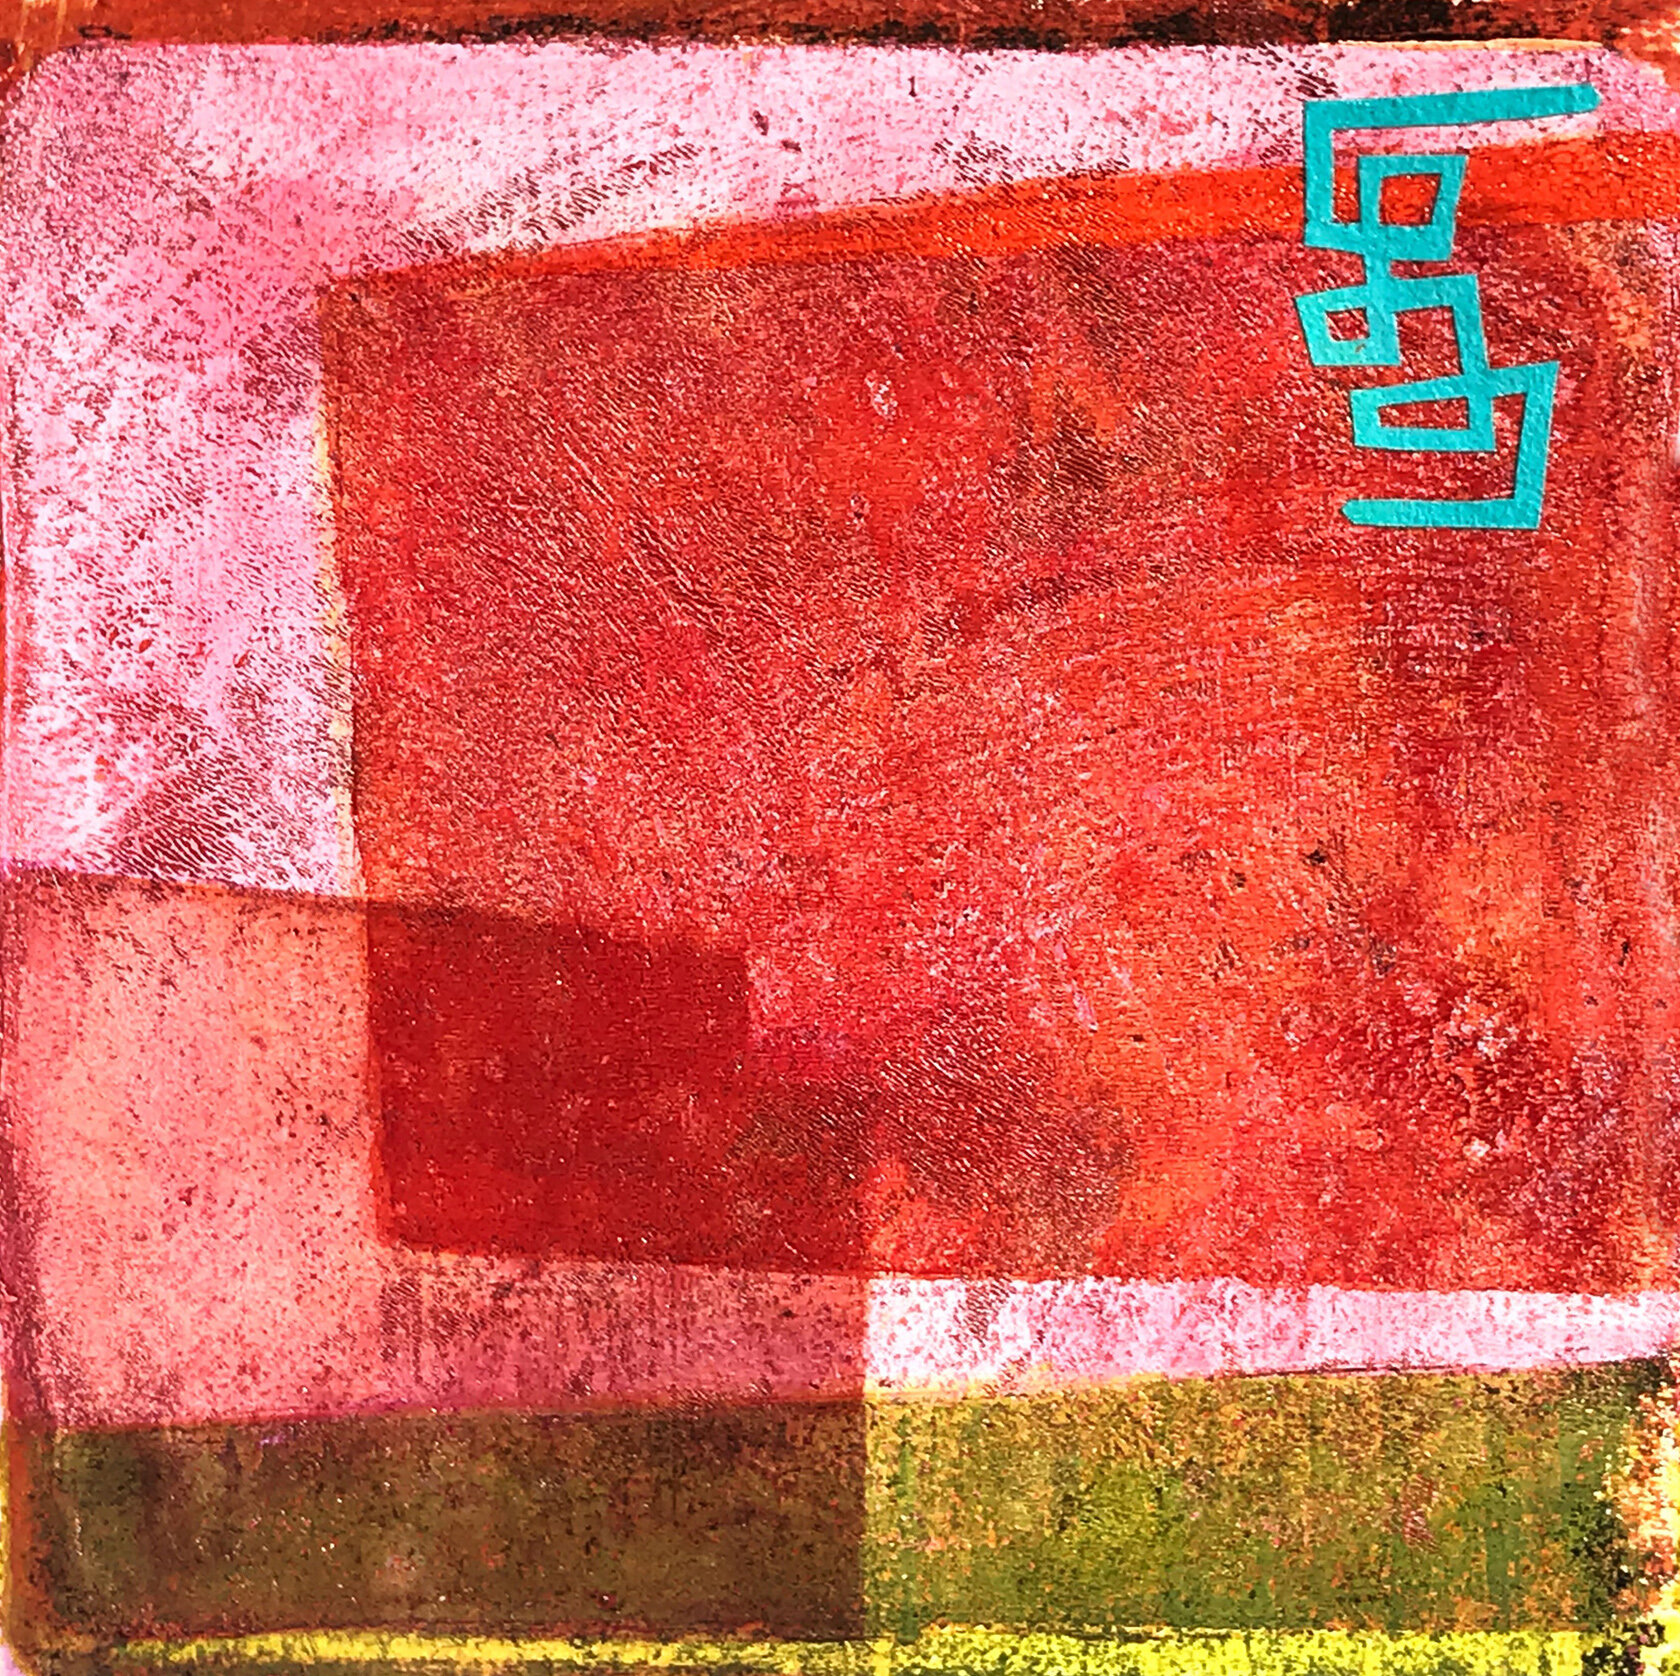   Object Thoughts 4,  monoprint, collage, 13 x 13 inches 